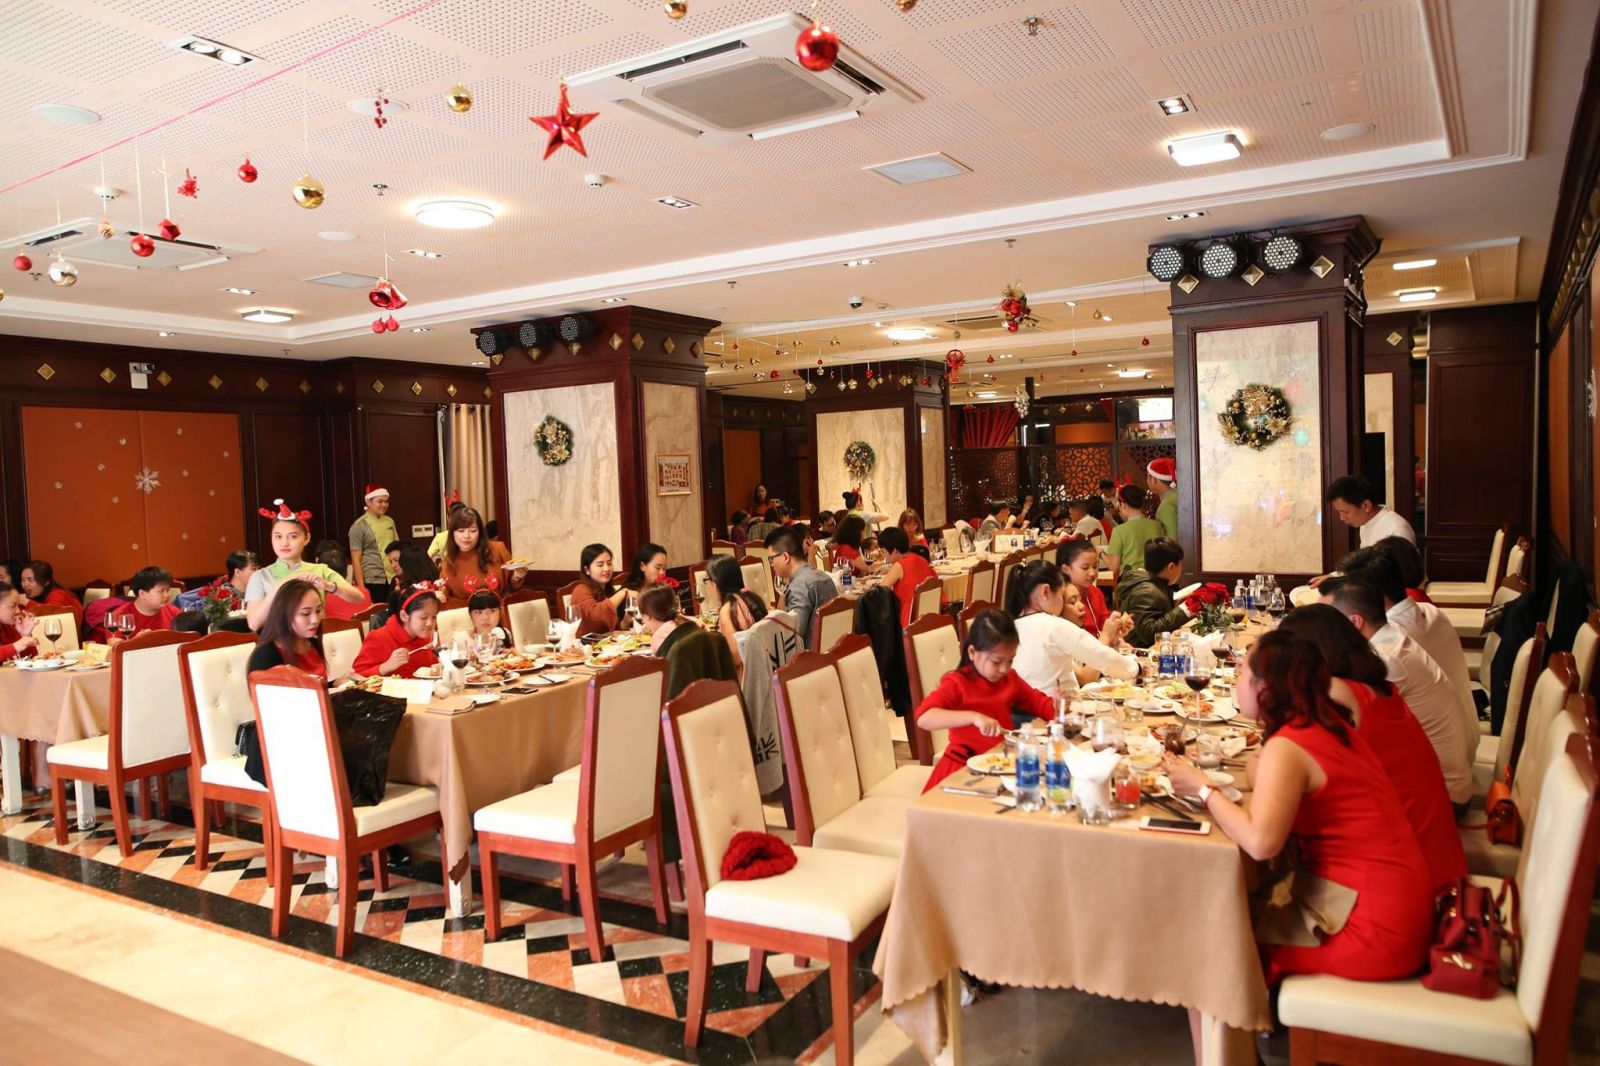 TOP 5 BEST HOTELS WITH THE MOST BEAUTIFUL CHRISTMAS DECORATION IN DANANG